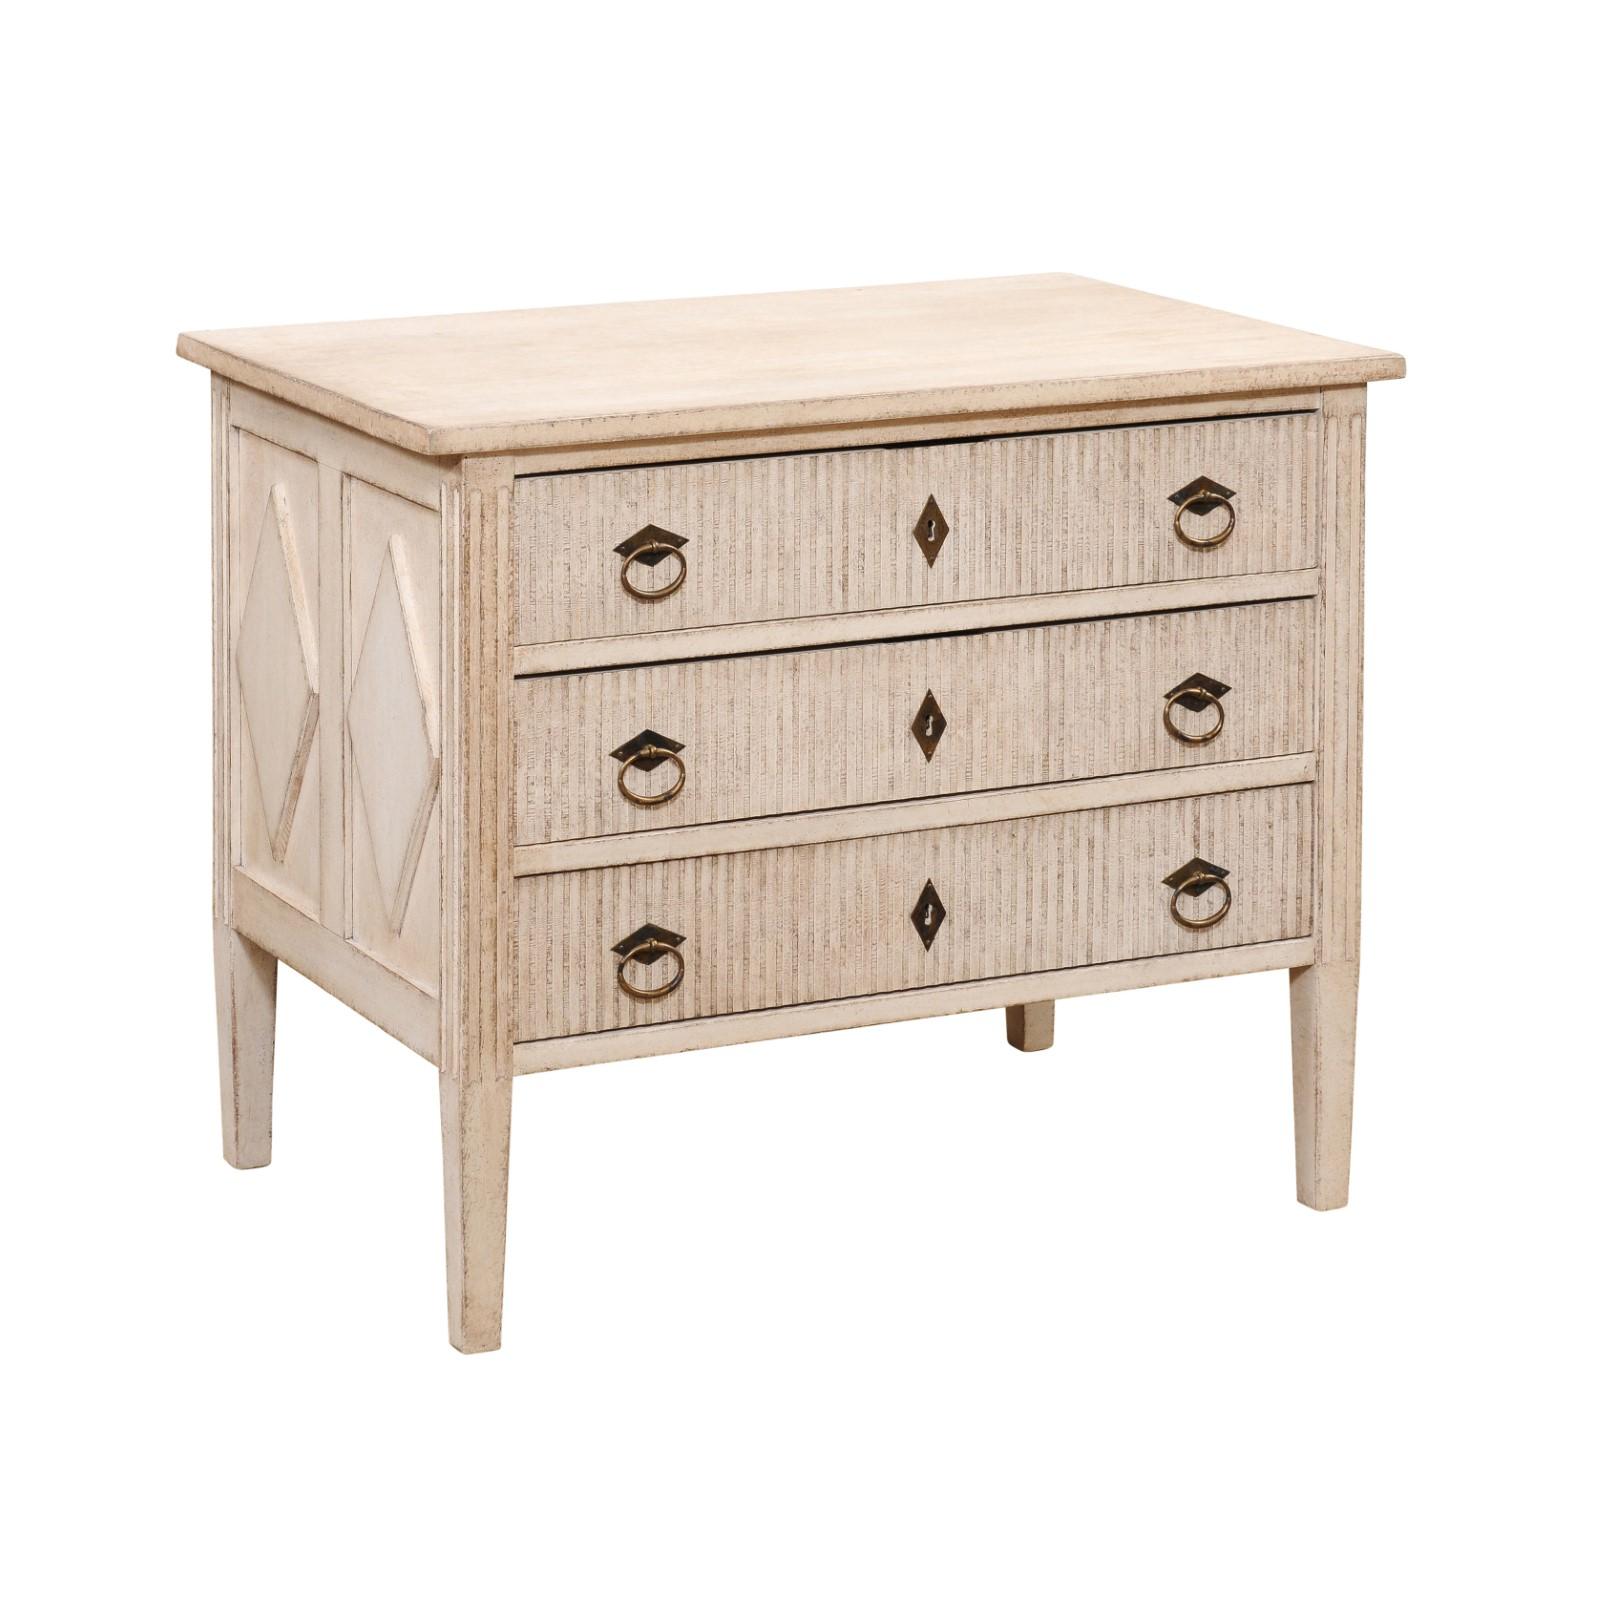 A Swedish Gustavian style three-drawer chest from the 19th century with creamy painted finish, carved reeded motifs on the drawers and diamonds on the side panels. Delve into the serene beauty of Swedish design with this 19th-century Gustavian style